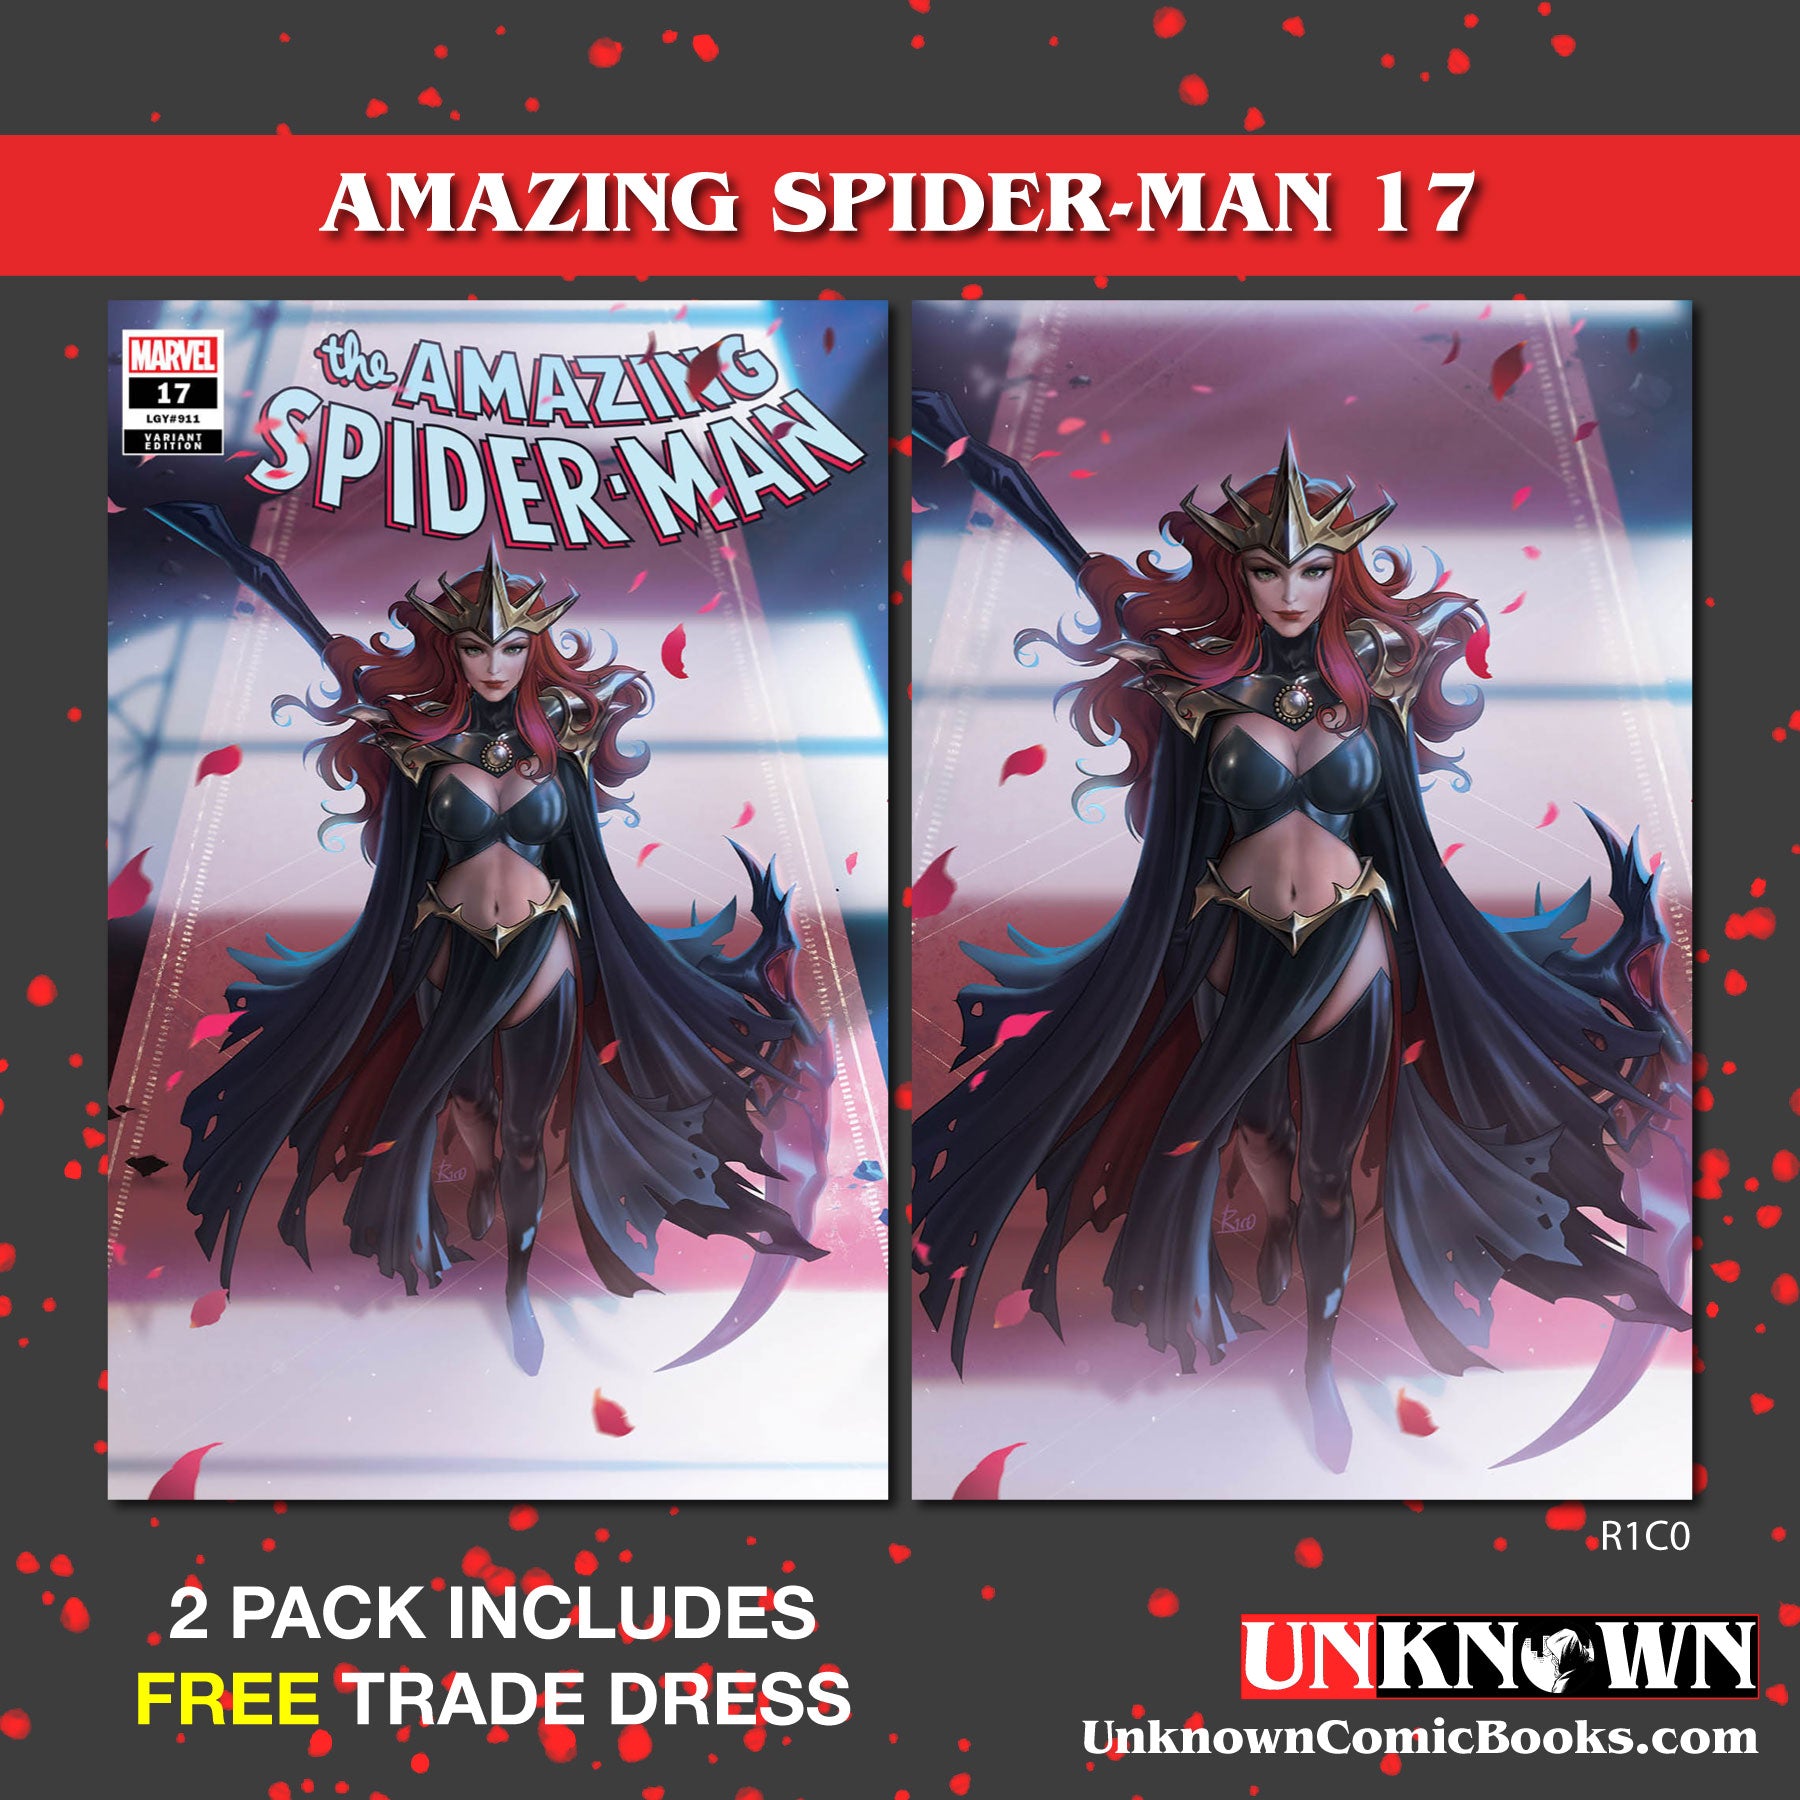 [2 PACK] **FREE TRADE DRESS** AMAZING SPIDER-MAN #17 [DWB] UNKNOWN COMICS R1C0 EXCLUSIVE VAR (01/11/2023)